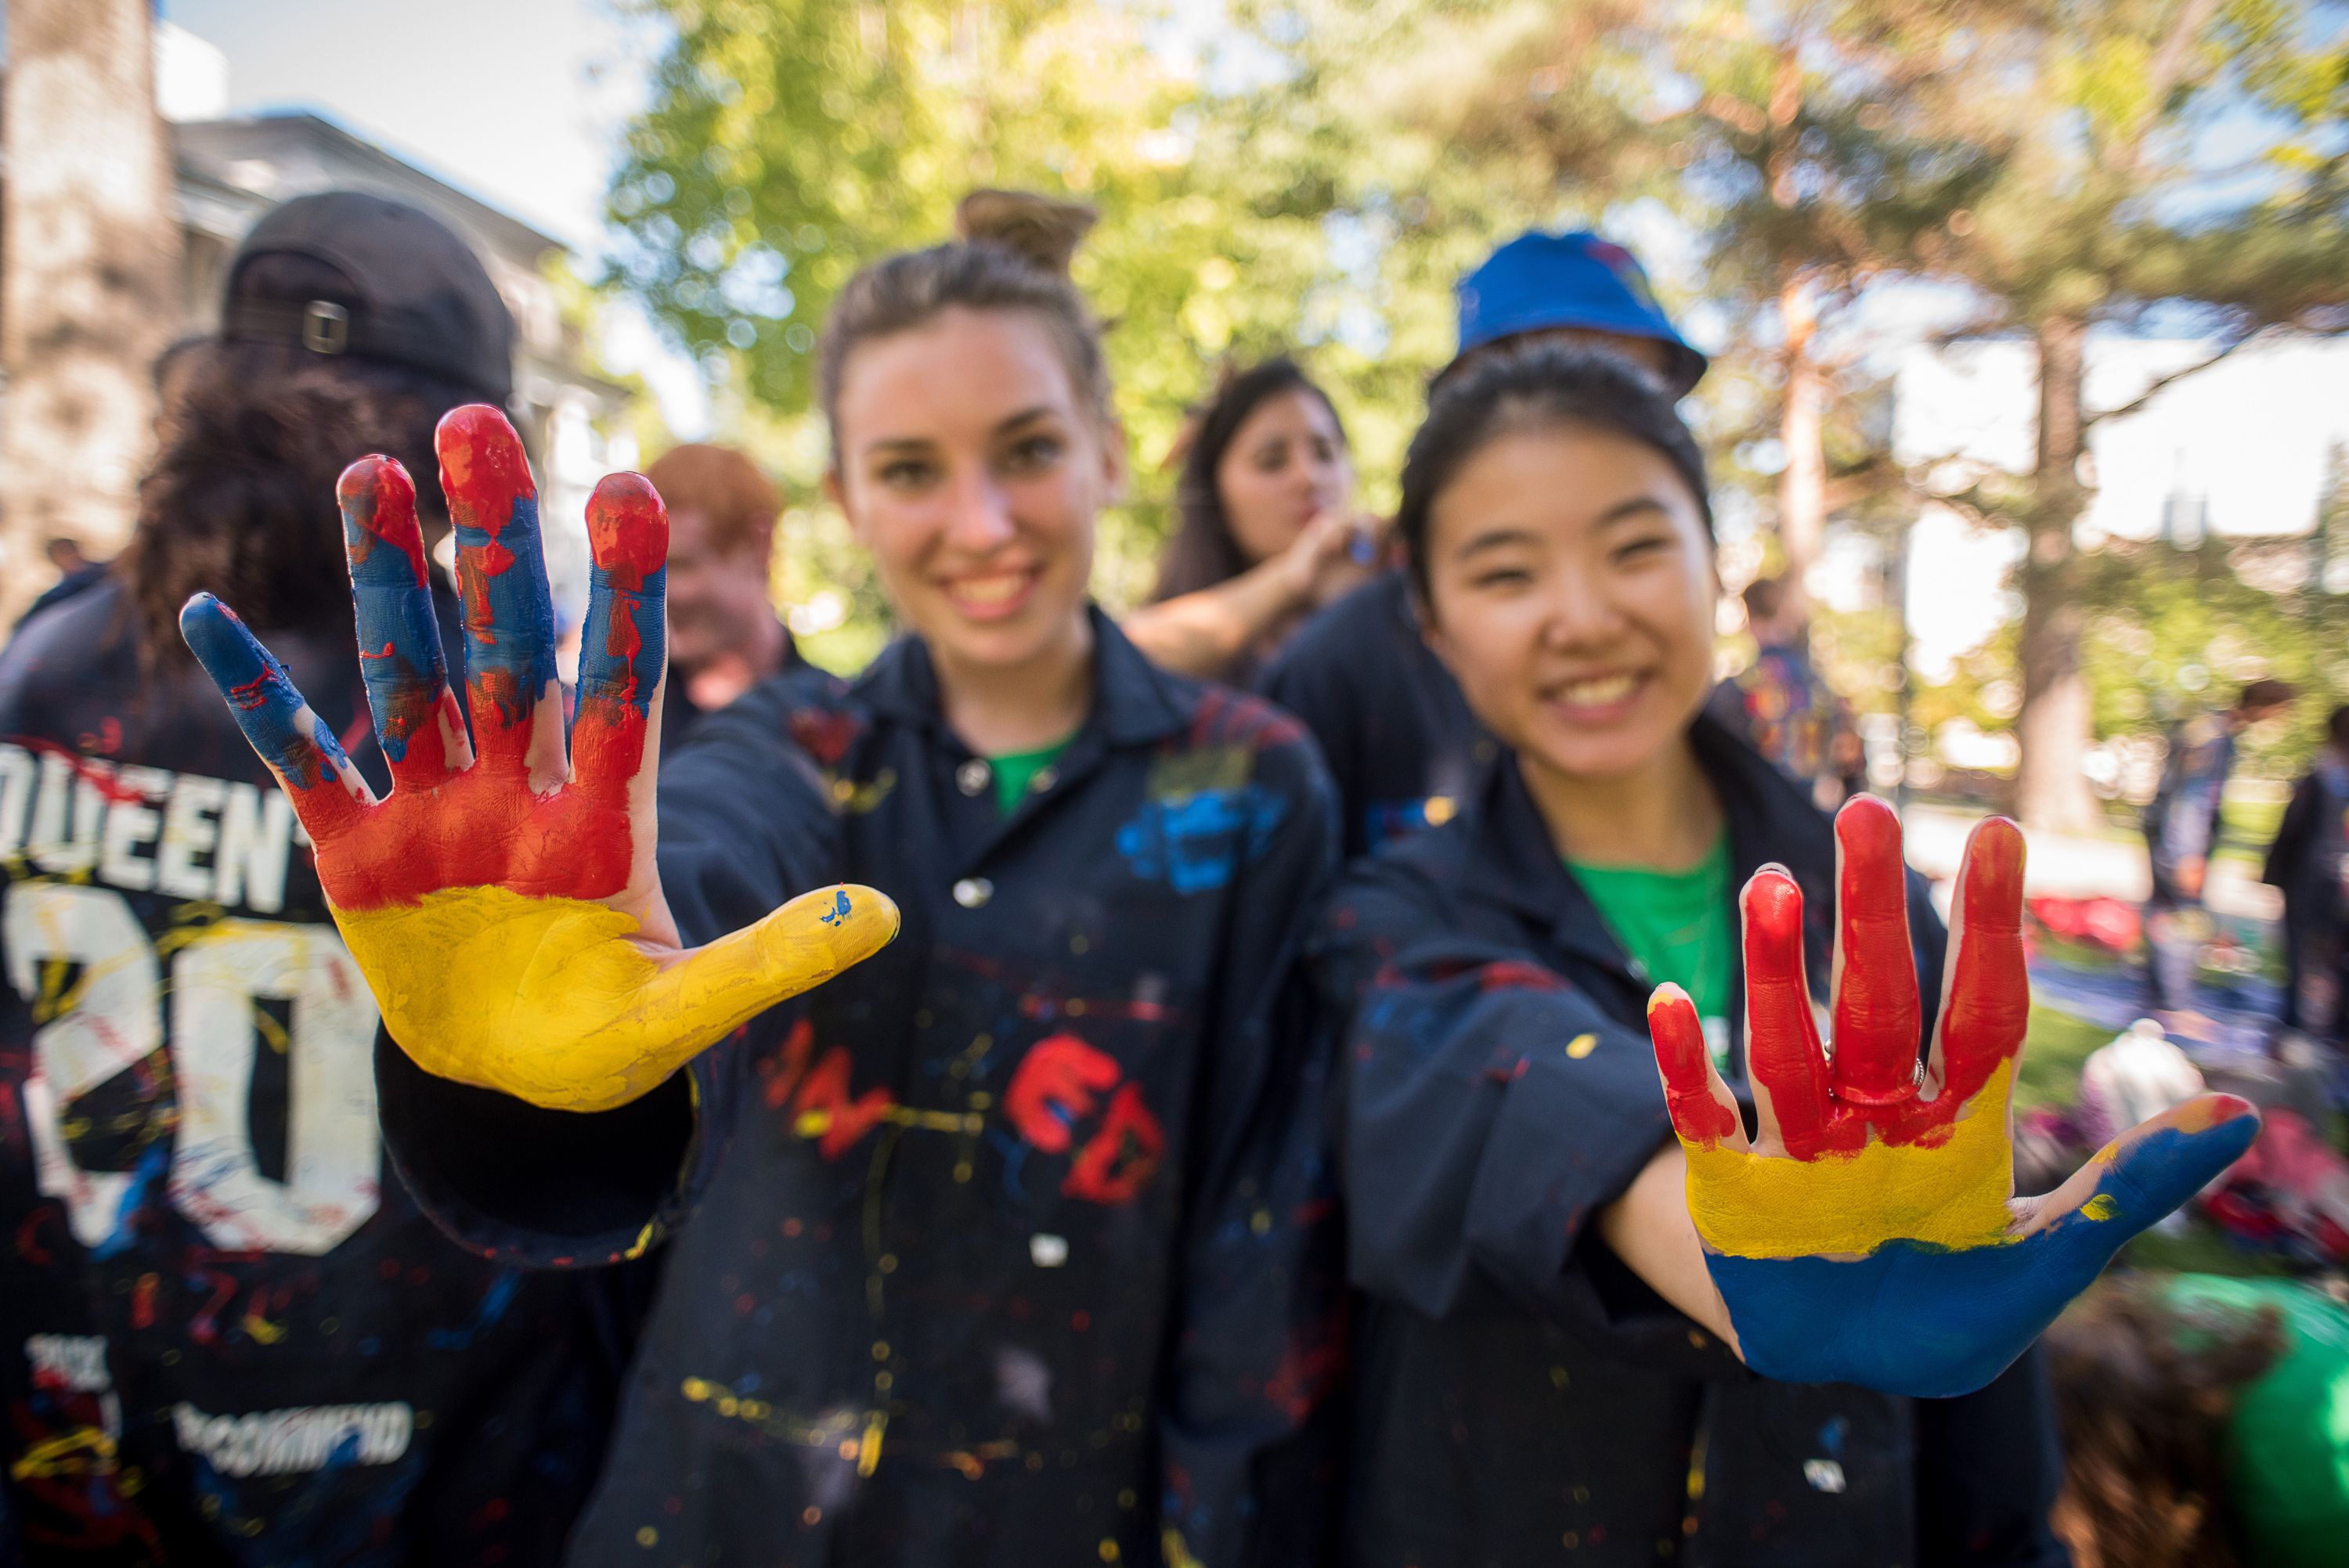 Two Queen's students holding out their hands painted with red, blue and yellow.